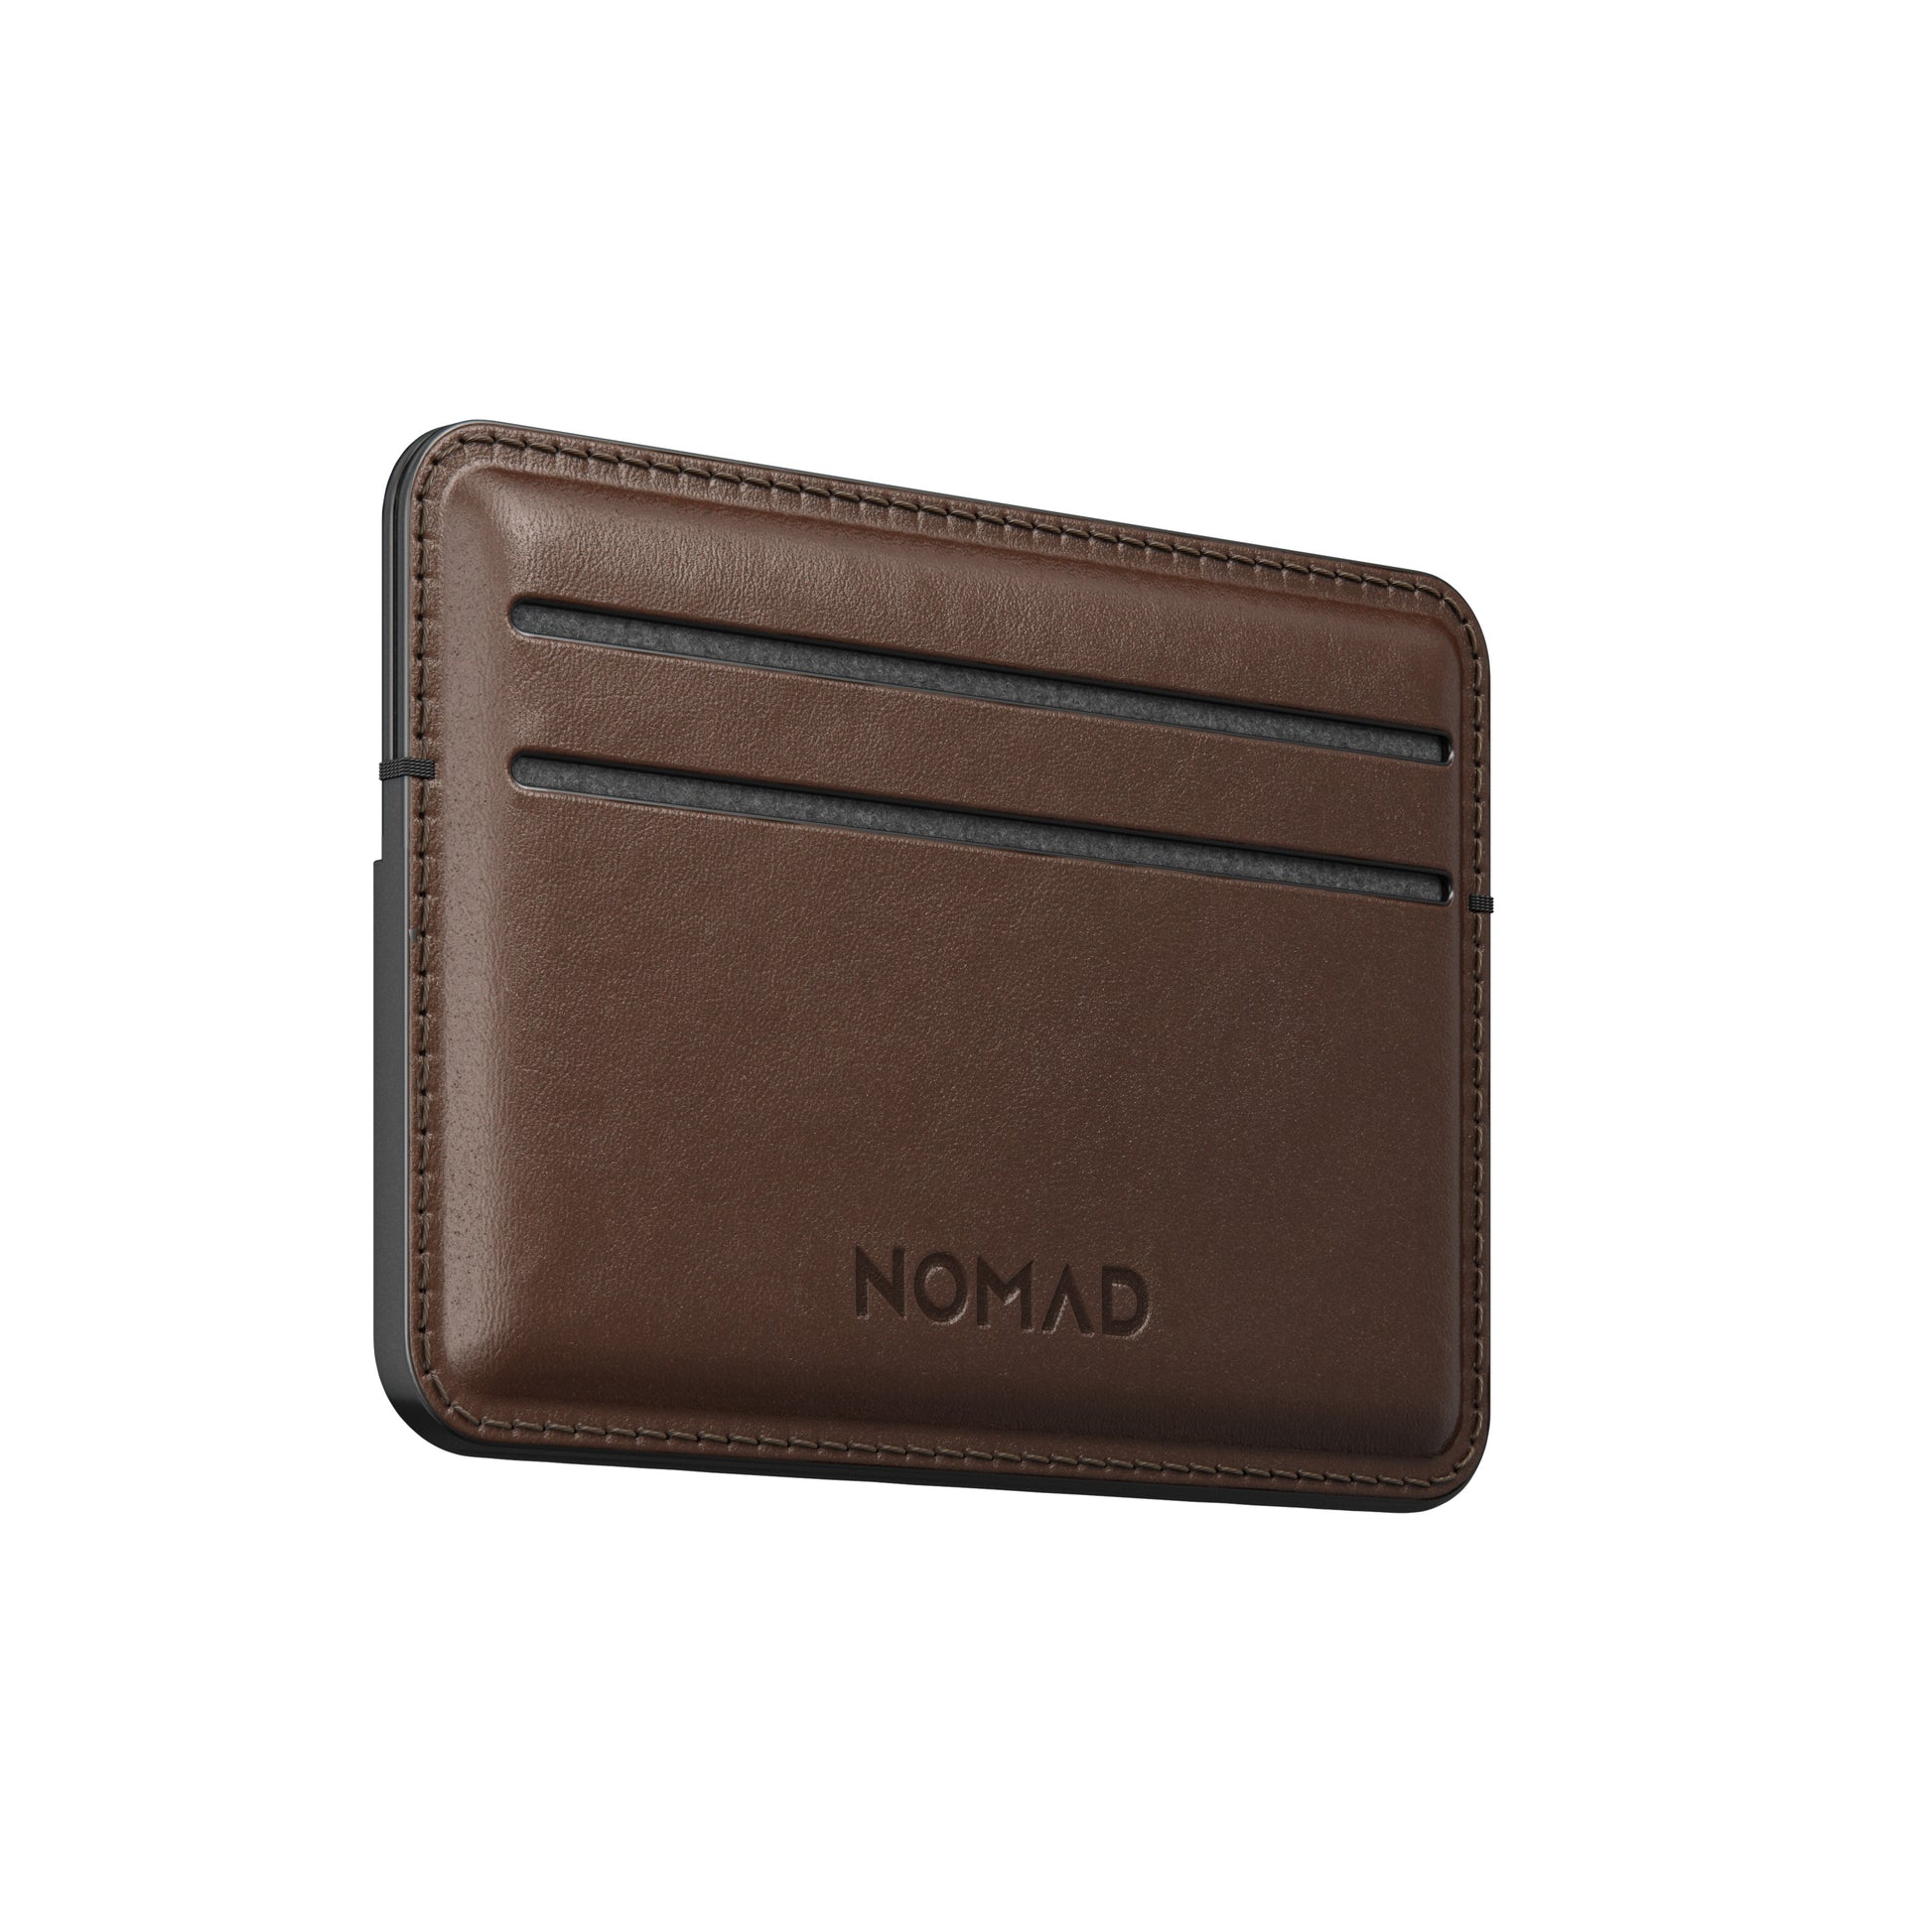 Nomad Card Wallet - The Usual